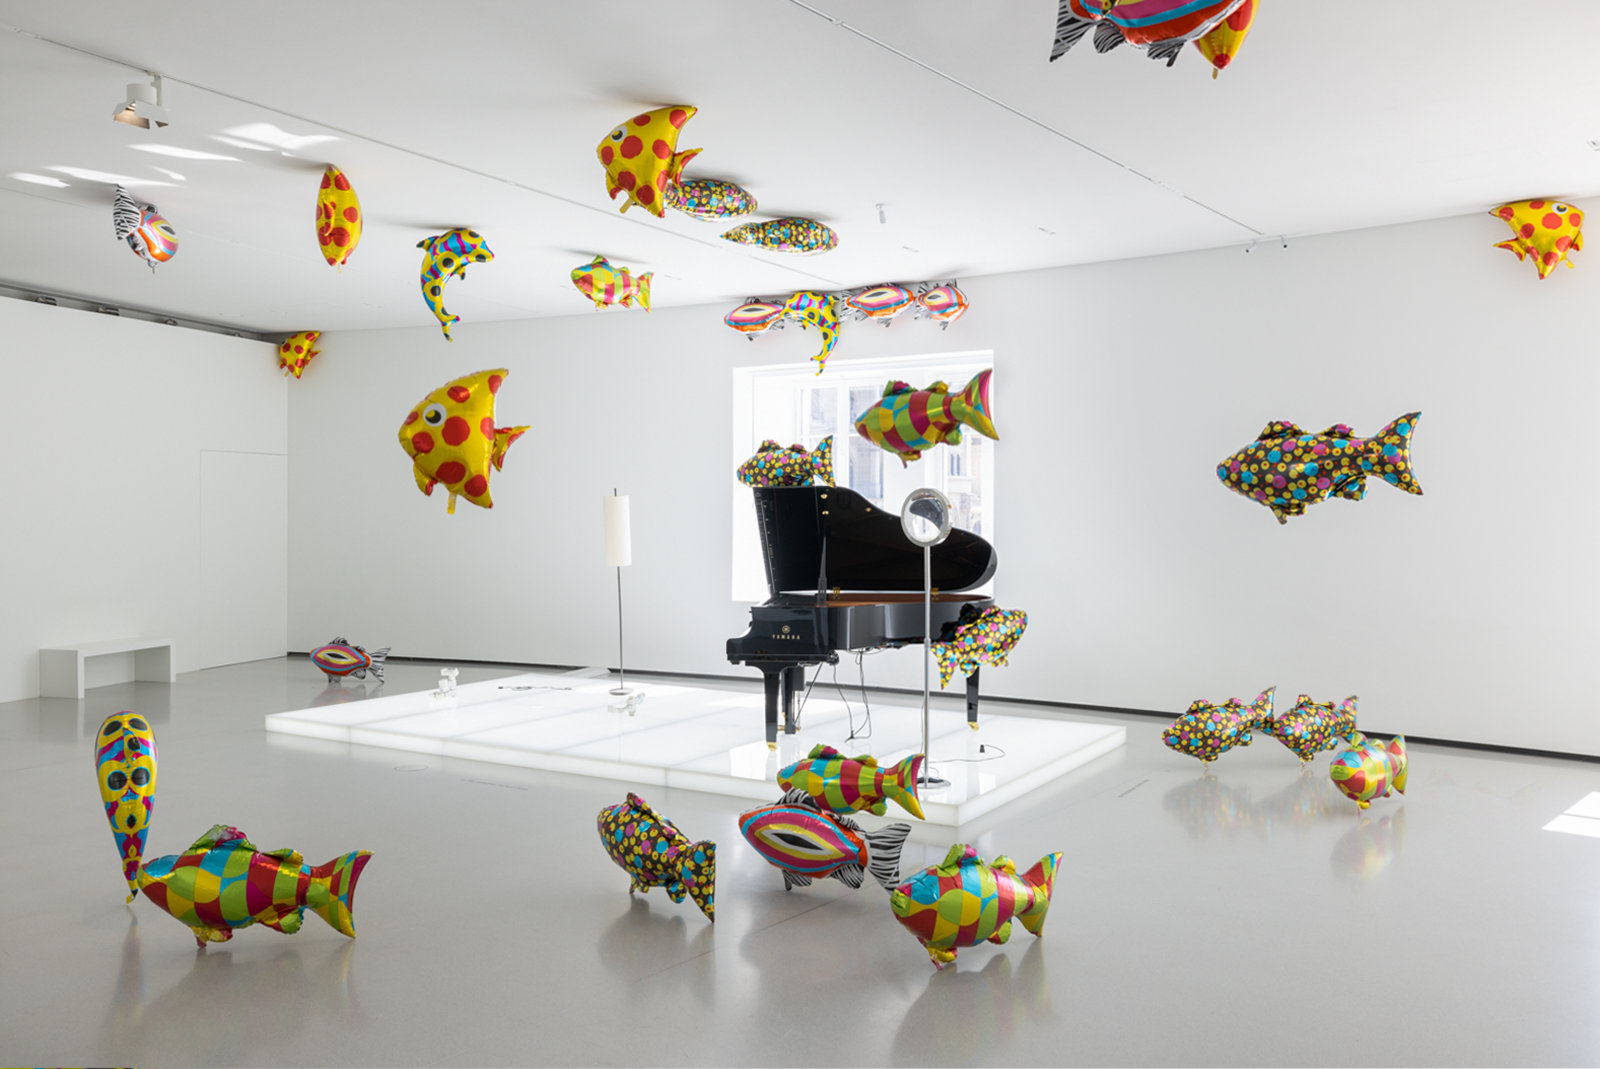 <div class="image_caption_container"><div class="image_caption"><p><span>Philippe Parreno, </span><b>Quasi Objects: My Room is a Fish Bowl, AC/DC Snakes, Happy Ending, Il Tempo del Postino, Opalescent acrylic glass podium, Disklavier Piano</b><span>, 2014.</span><span> Photo © Andrea Rossetti</span></p></div></div>